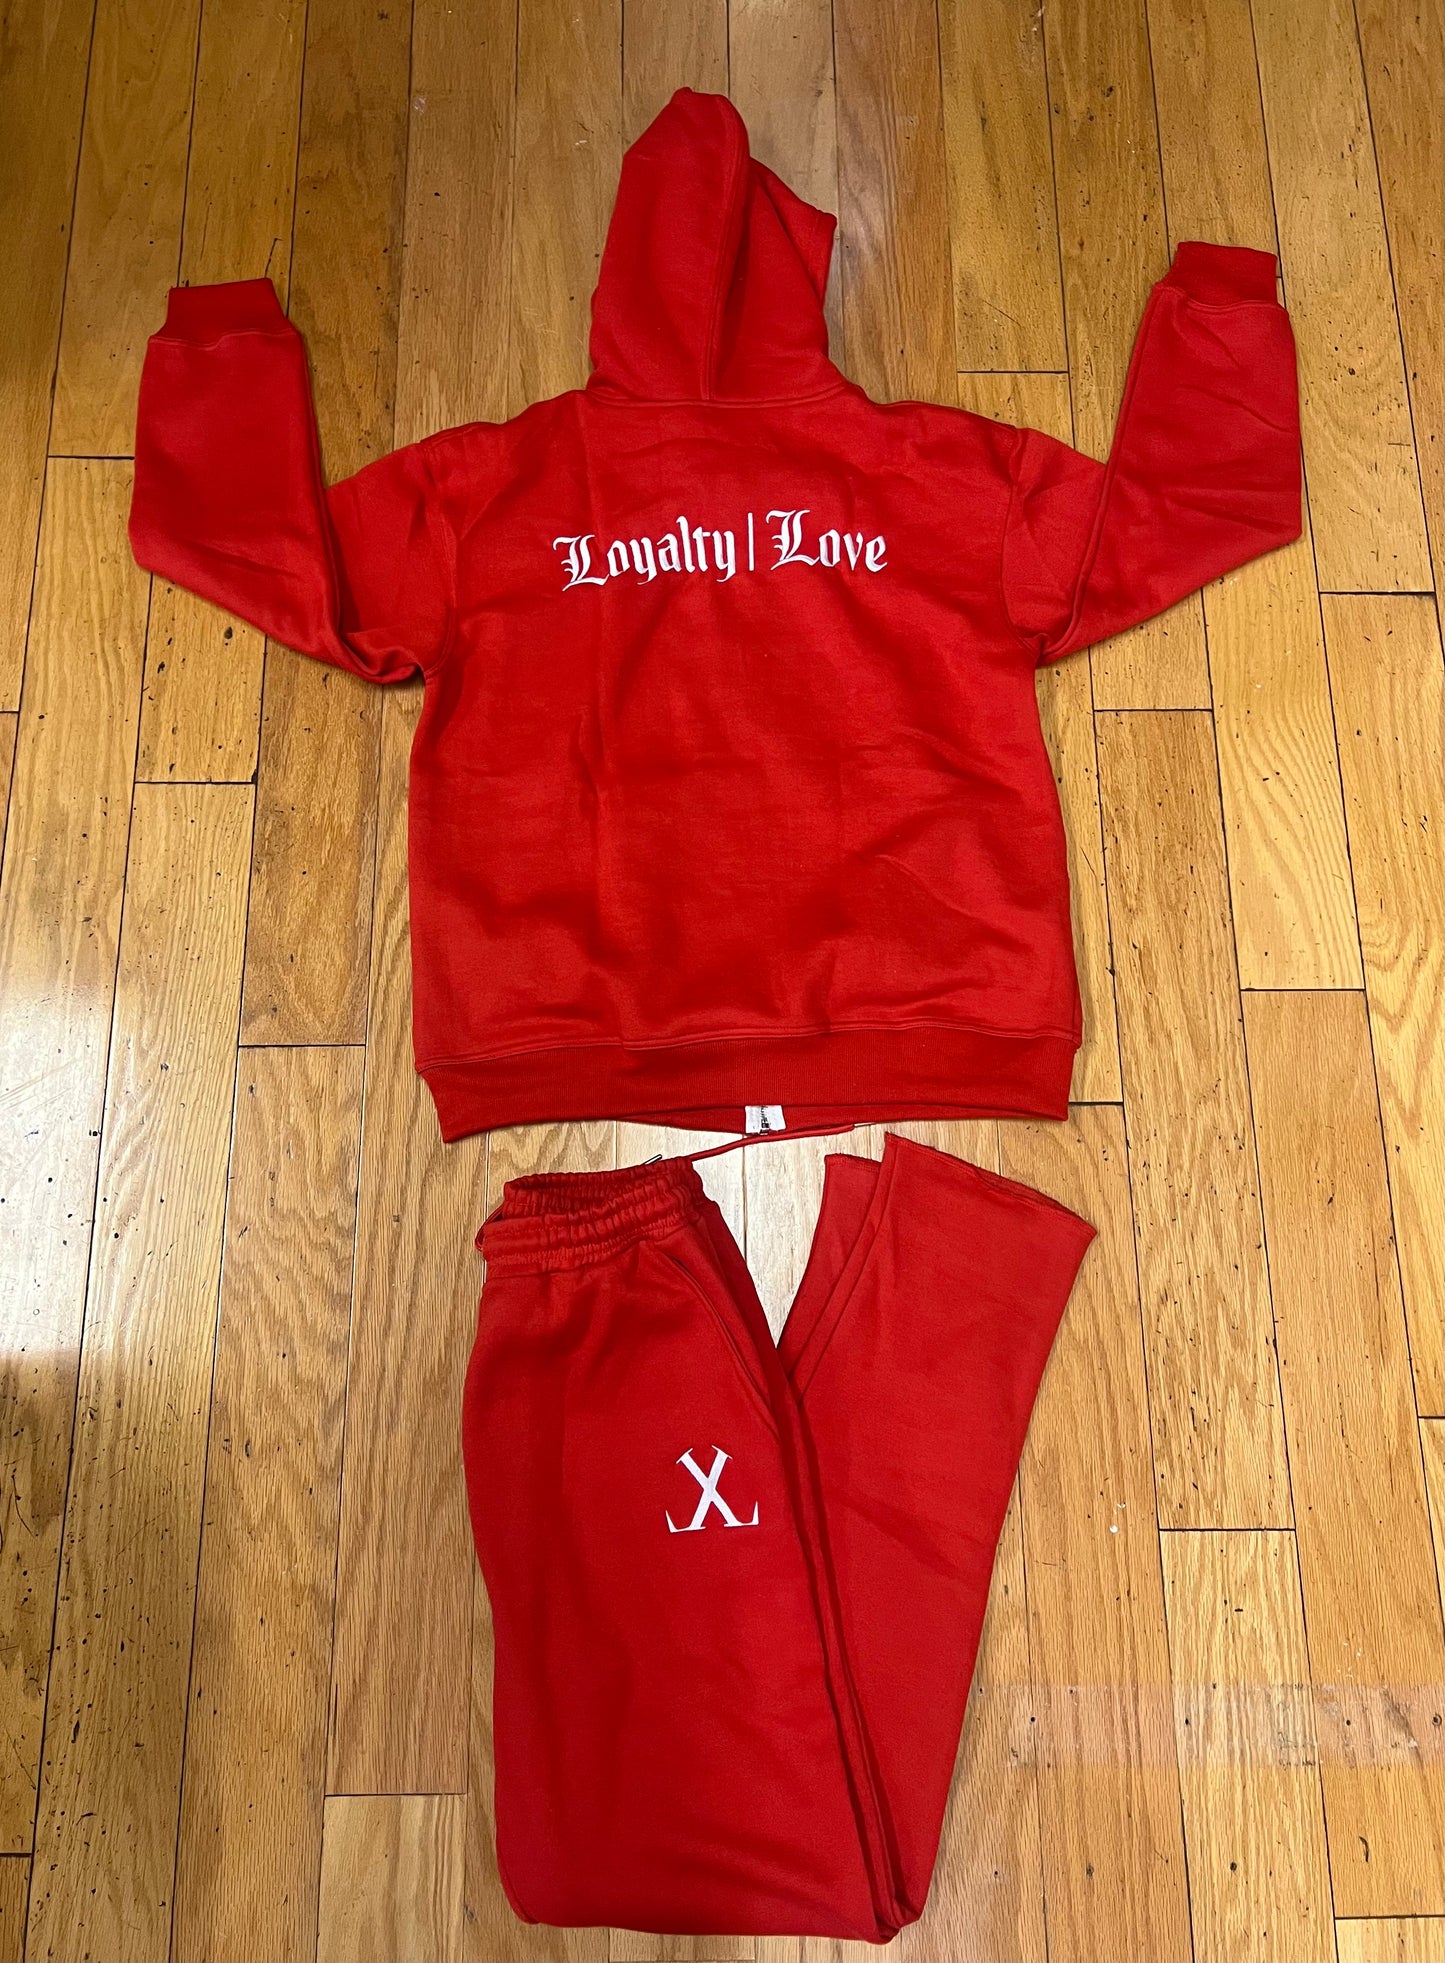 Red Loyalty Love Zip up